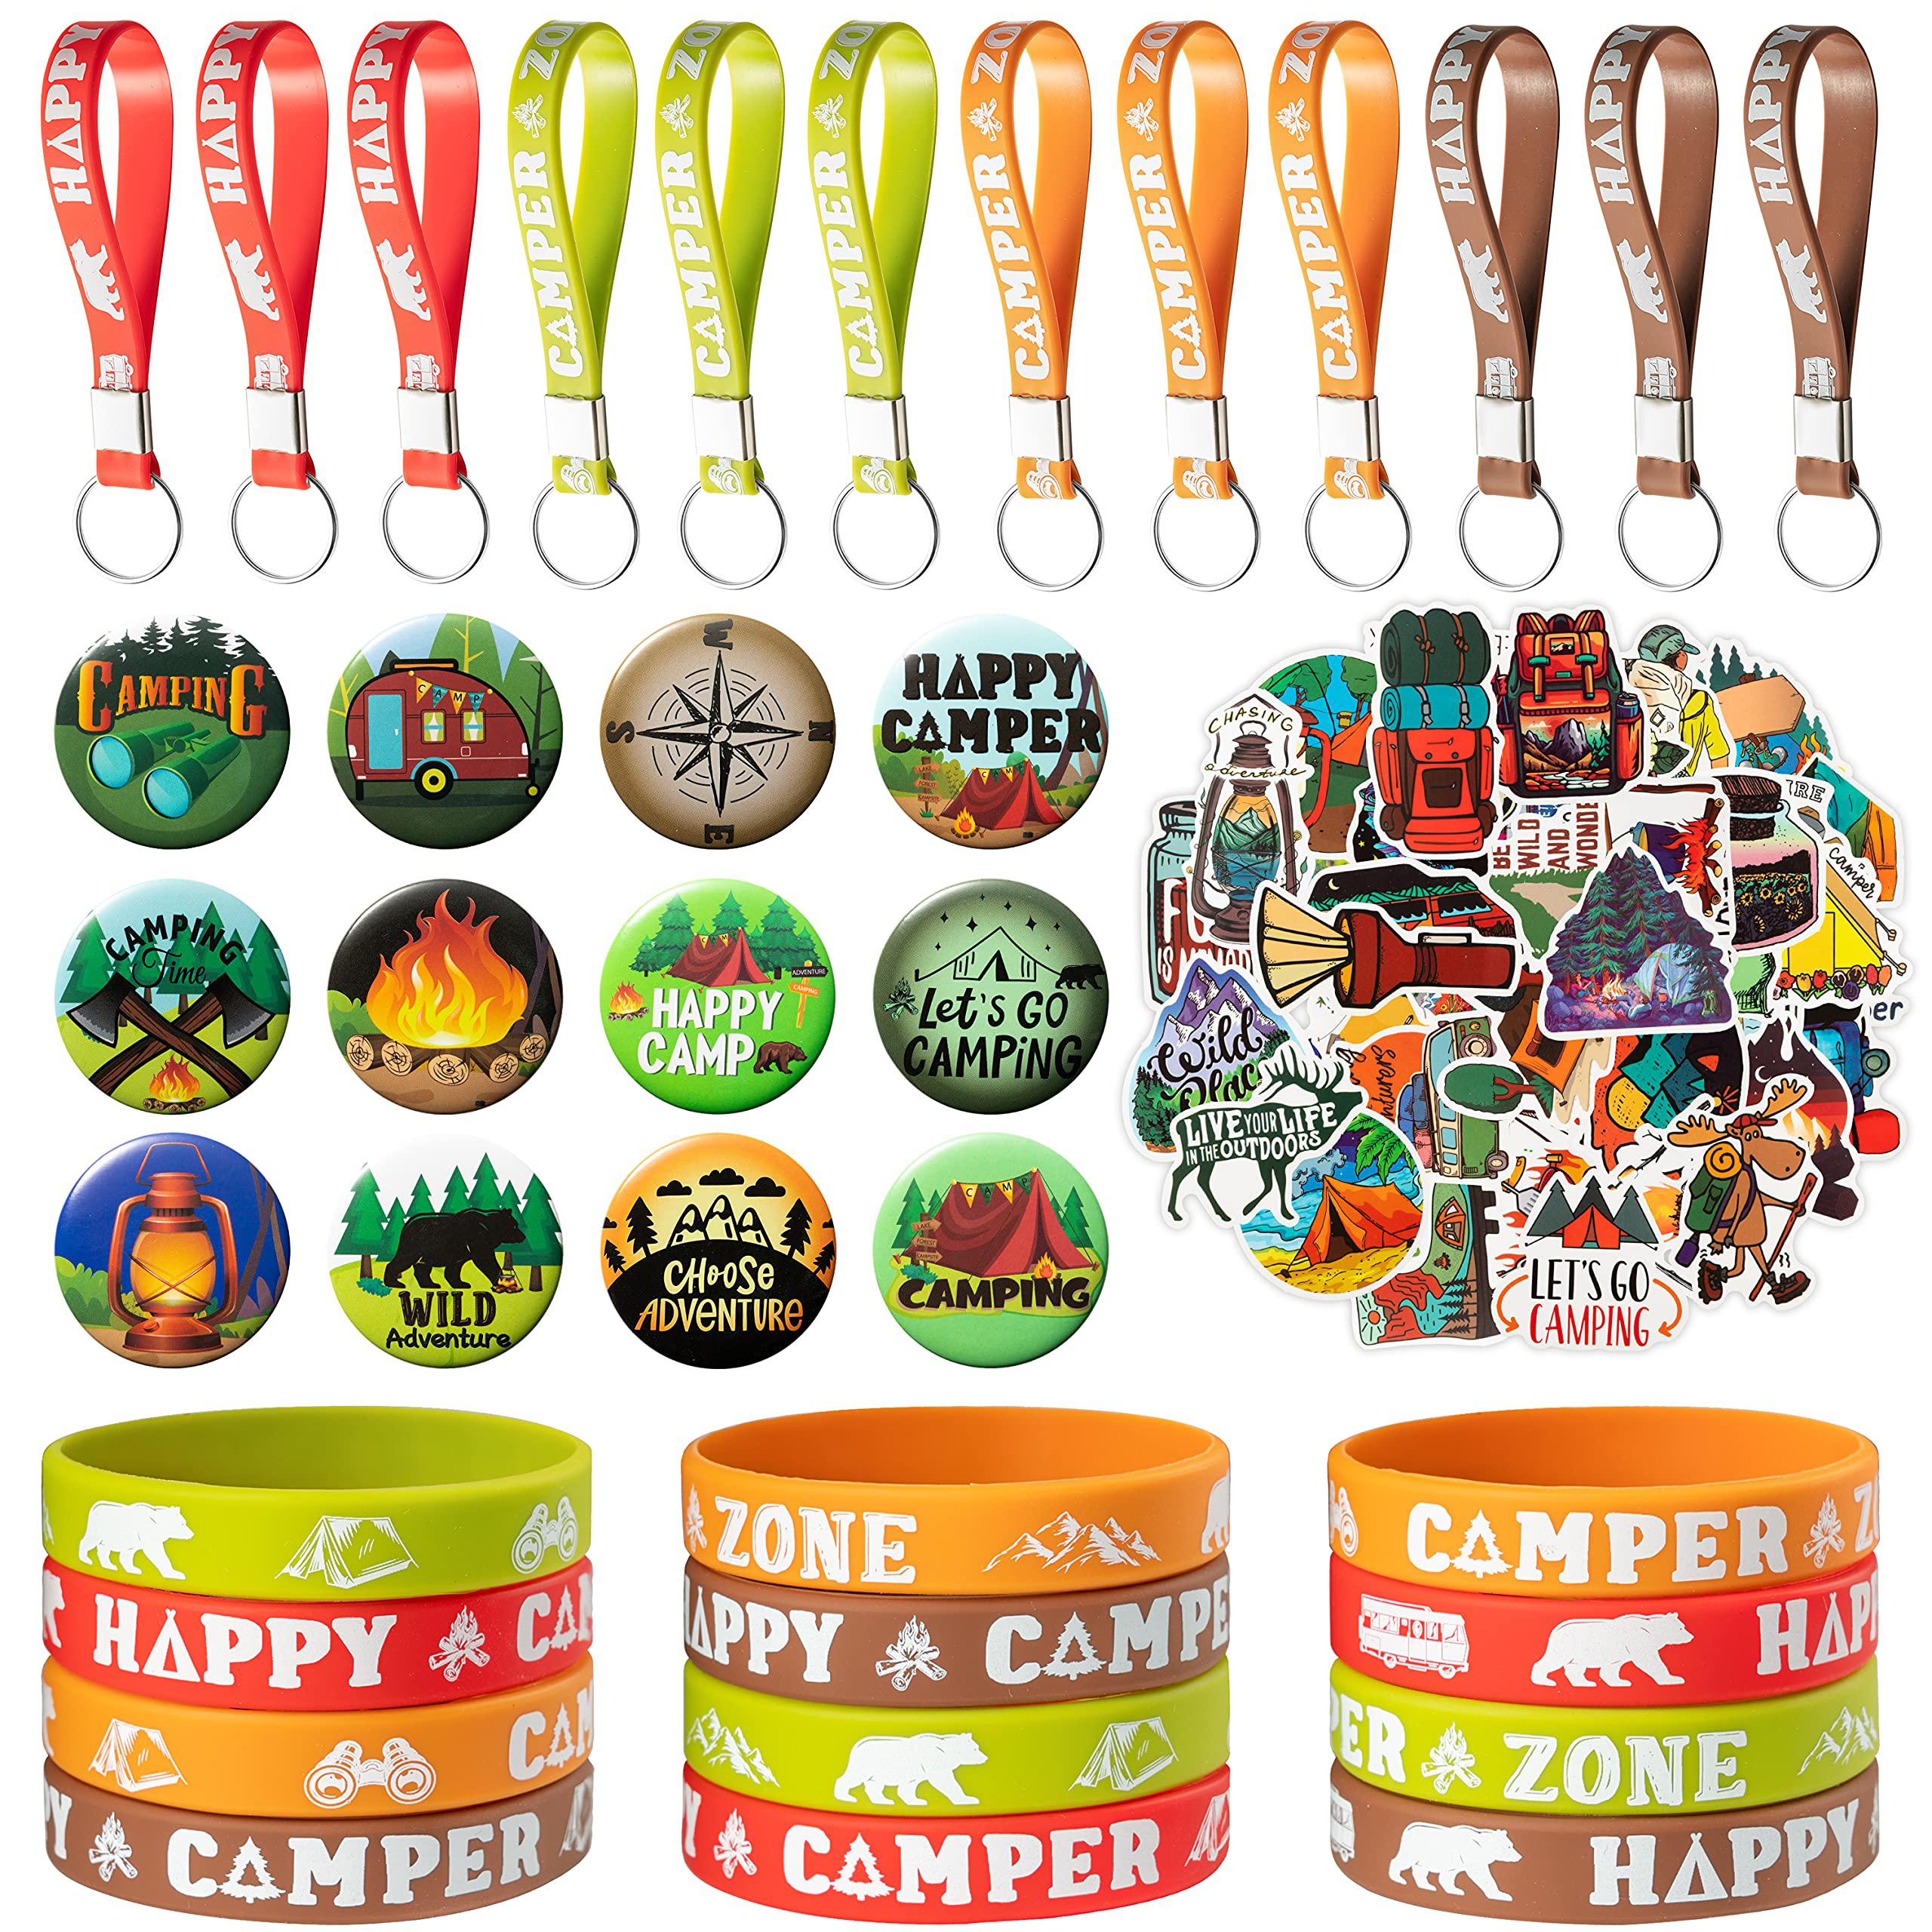 B2jkae 84pcs camp party supplies kit, camping party favors all-in-one pack party supplies include stickers keychain badge wristband 